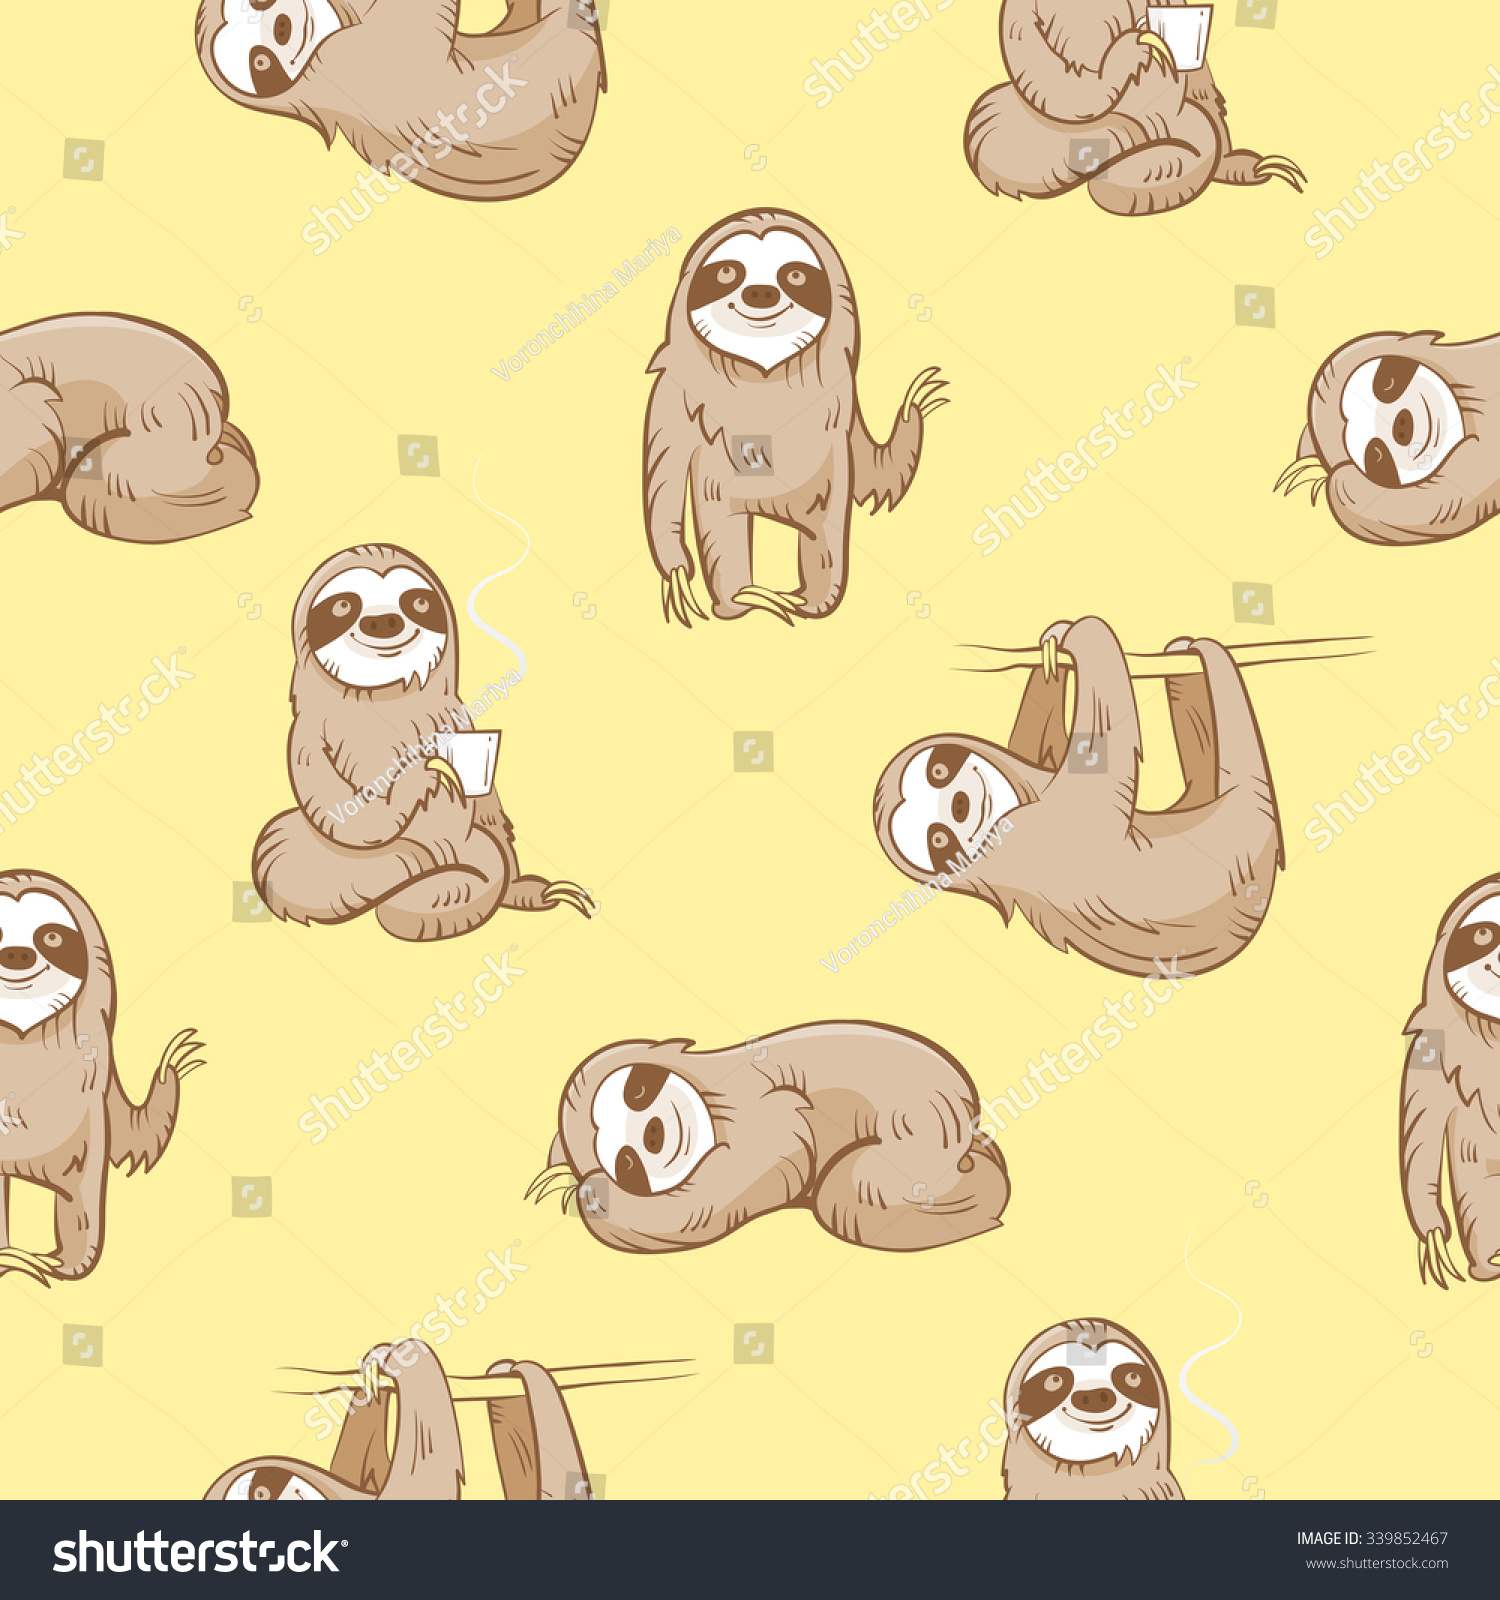 stock vector vector seamless pattern with cute cartoon sloth on yellow background 339852467